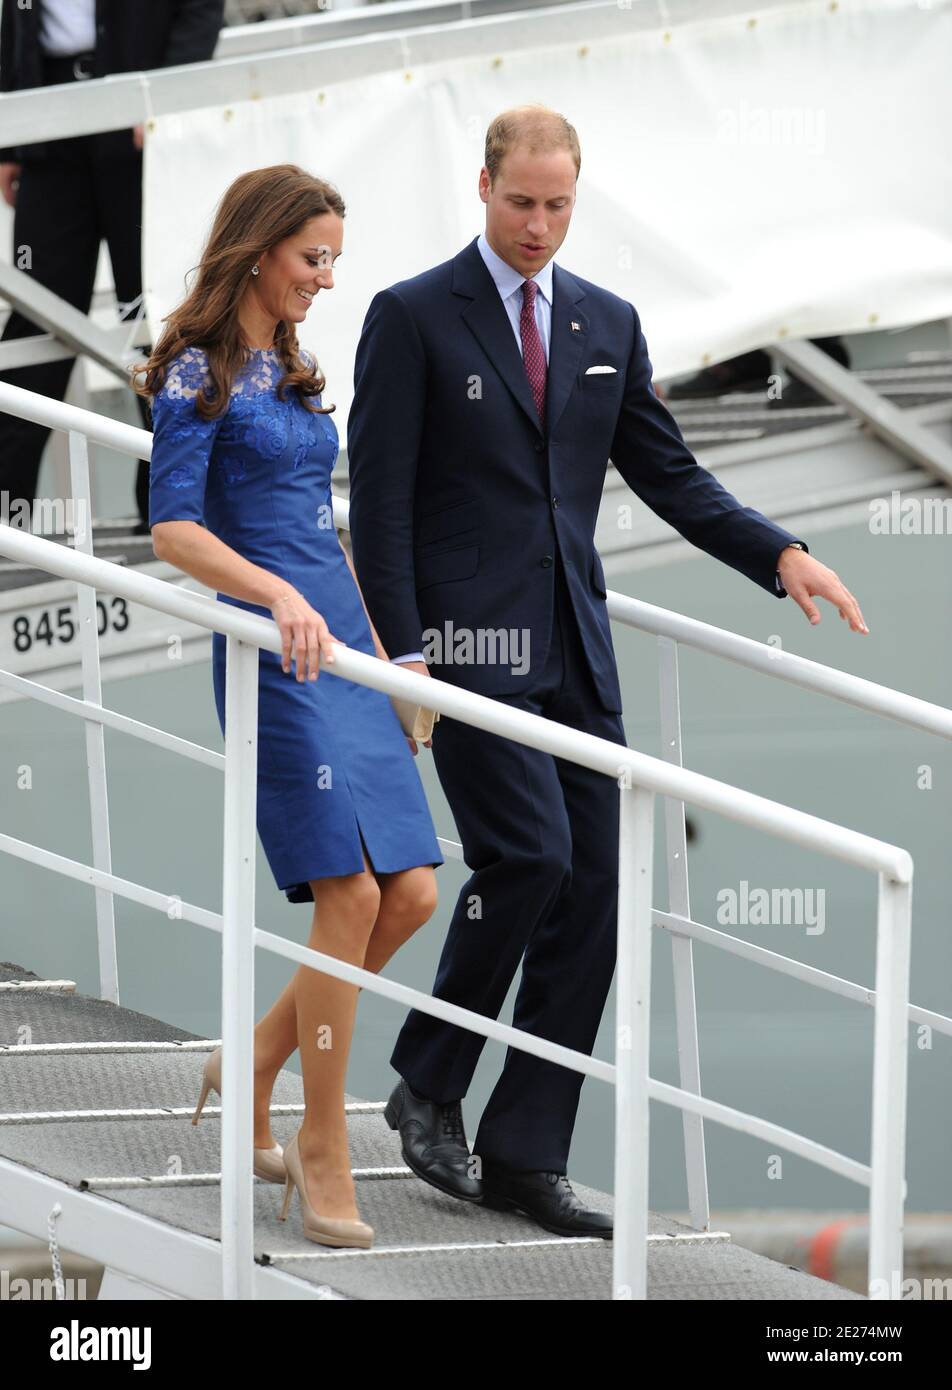 Prince William, Duke of Cambridge and Catherine, Duchess of Cambridge disembark HMCS Montreal on July 3, 2011 in Quebec City, Canada. The newly married Royal Couple are on the fourth day of their first joint overseas tour. Photo by Douliery-Hahn/ABACAPRESS.COM Stock Photo